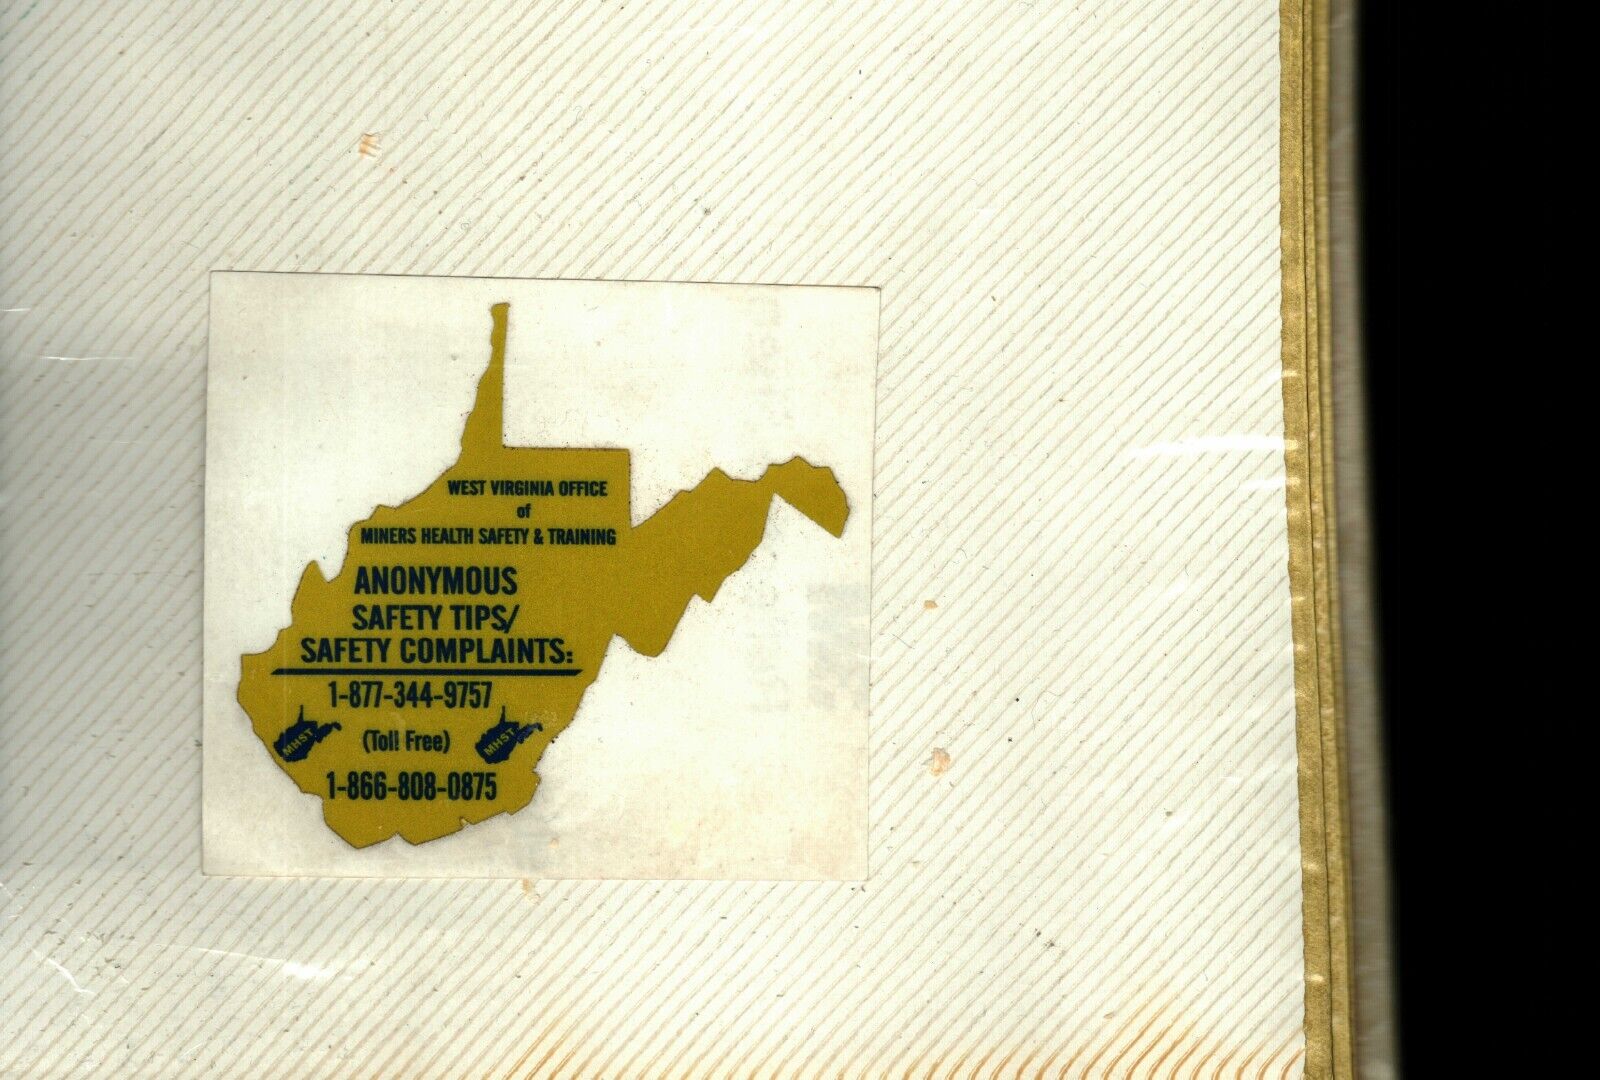 NICE WV. MINERS HEALTH SAFETY & TRAINING COAL MINING STICKERS # 1240